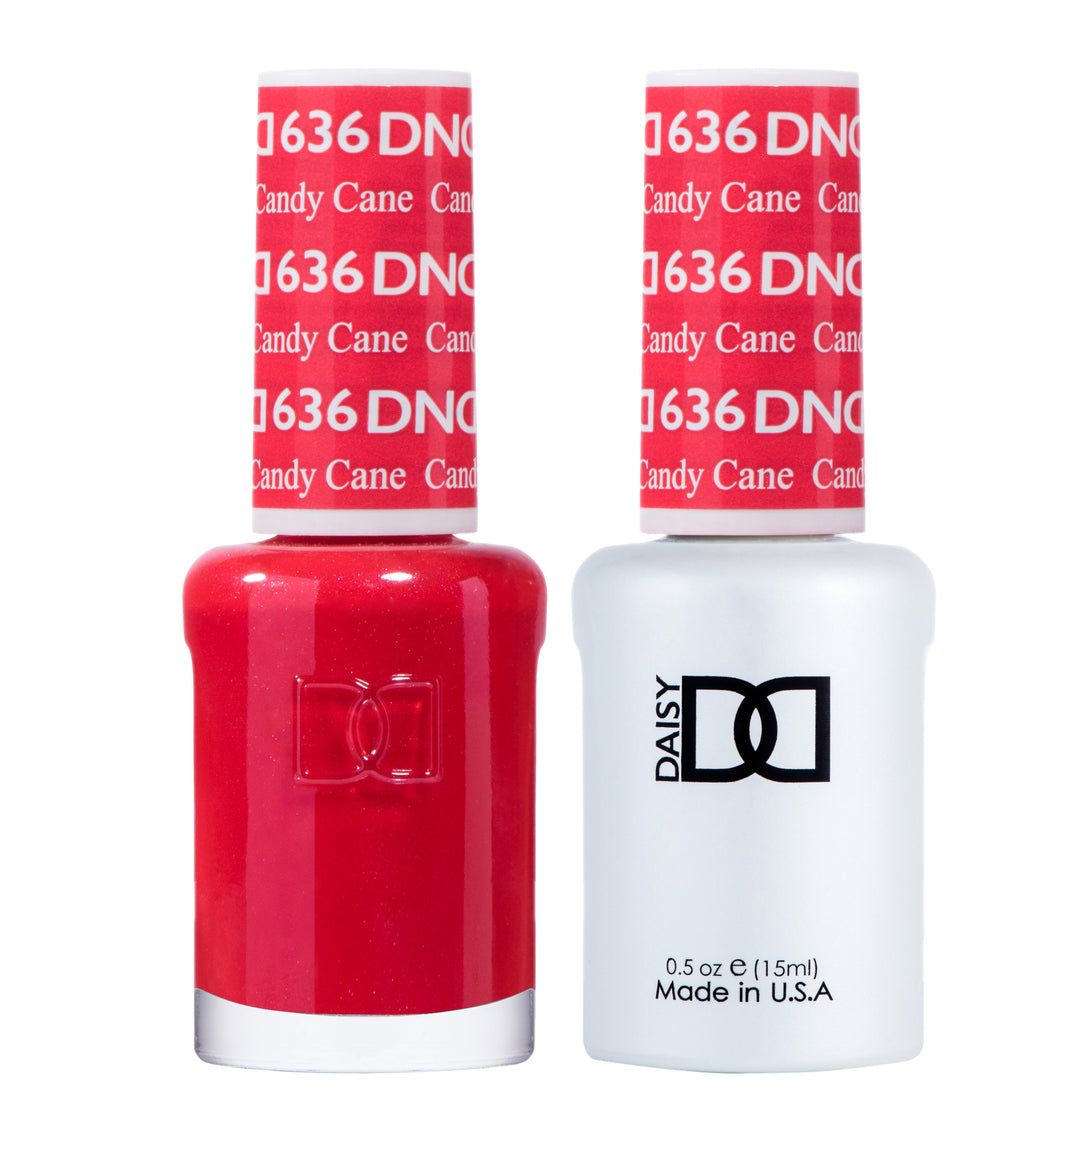 DND DUO Nail Lacquer and UV|LED Gel Polish Candy Cane 636 (2 x 15ml)